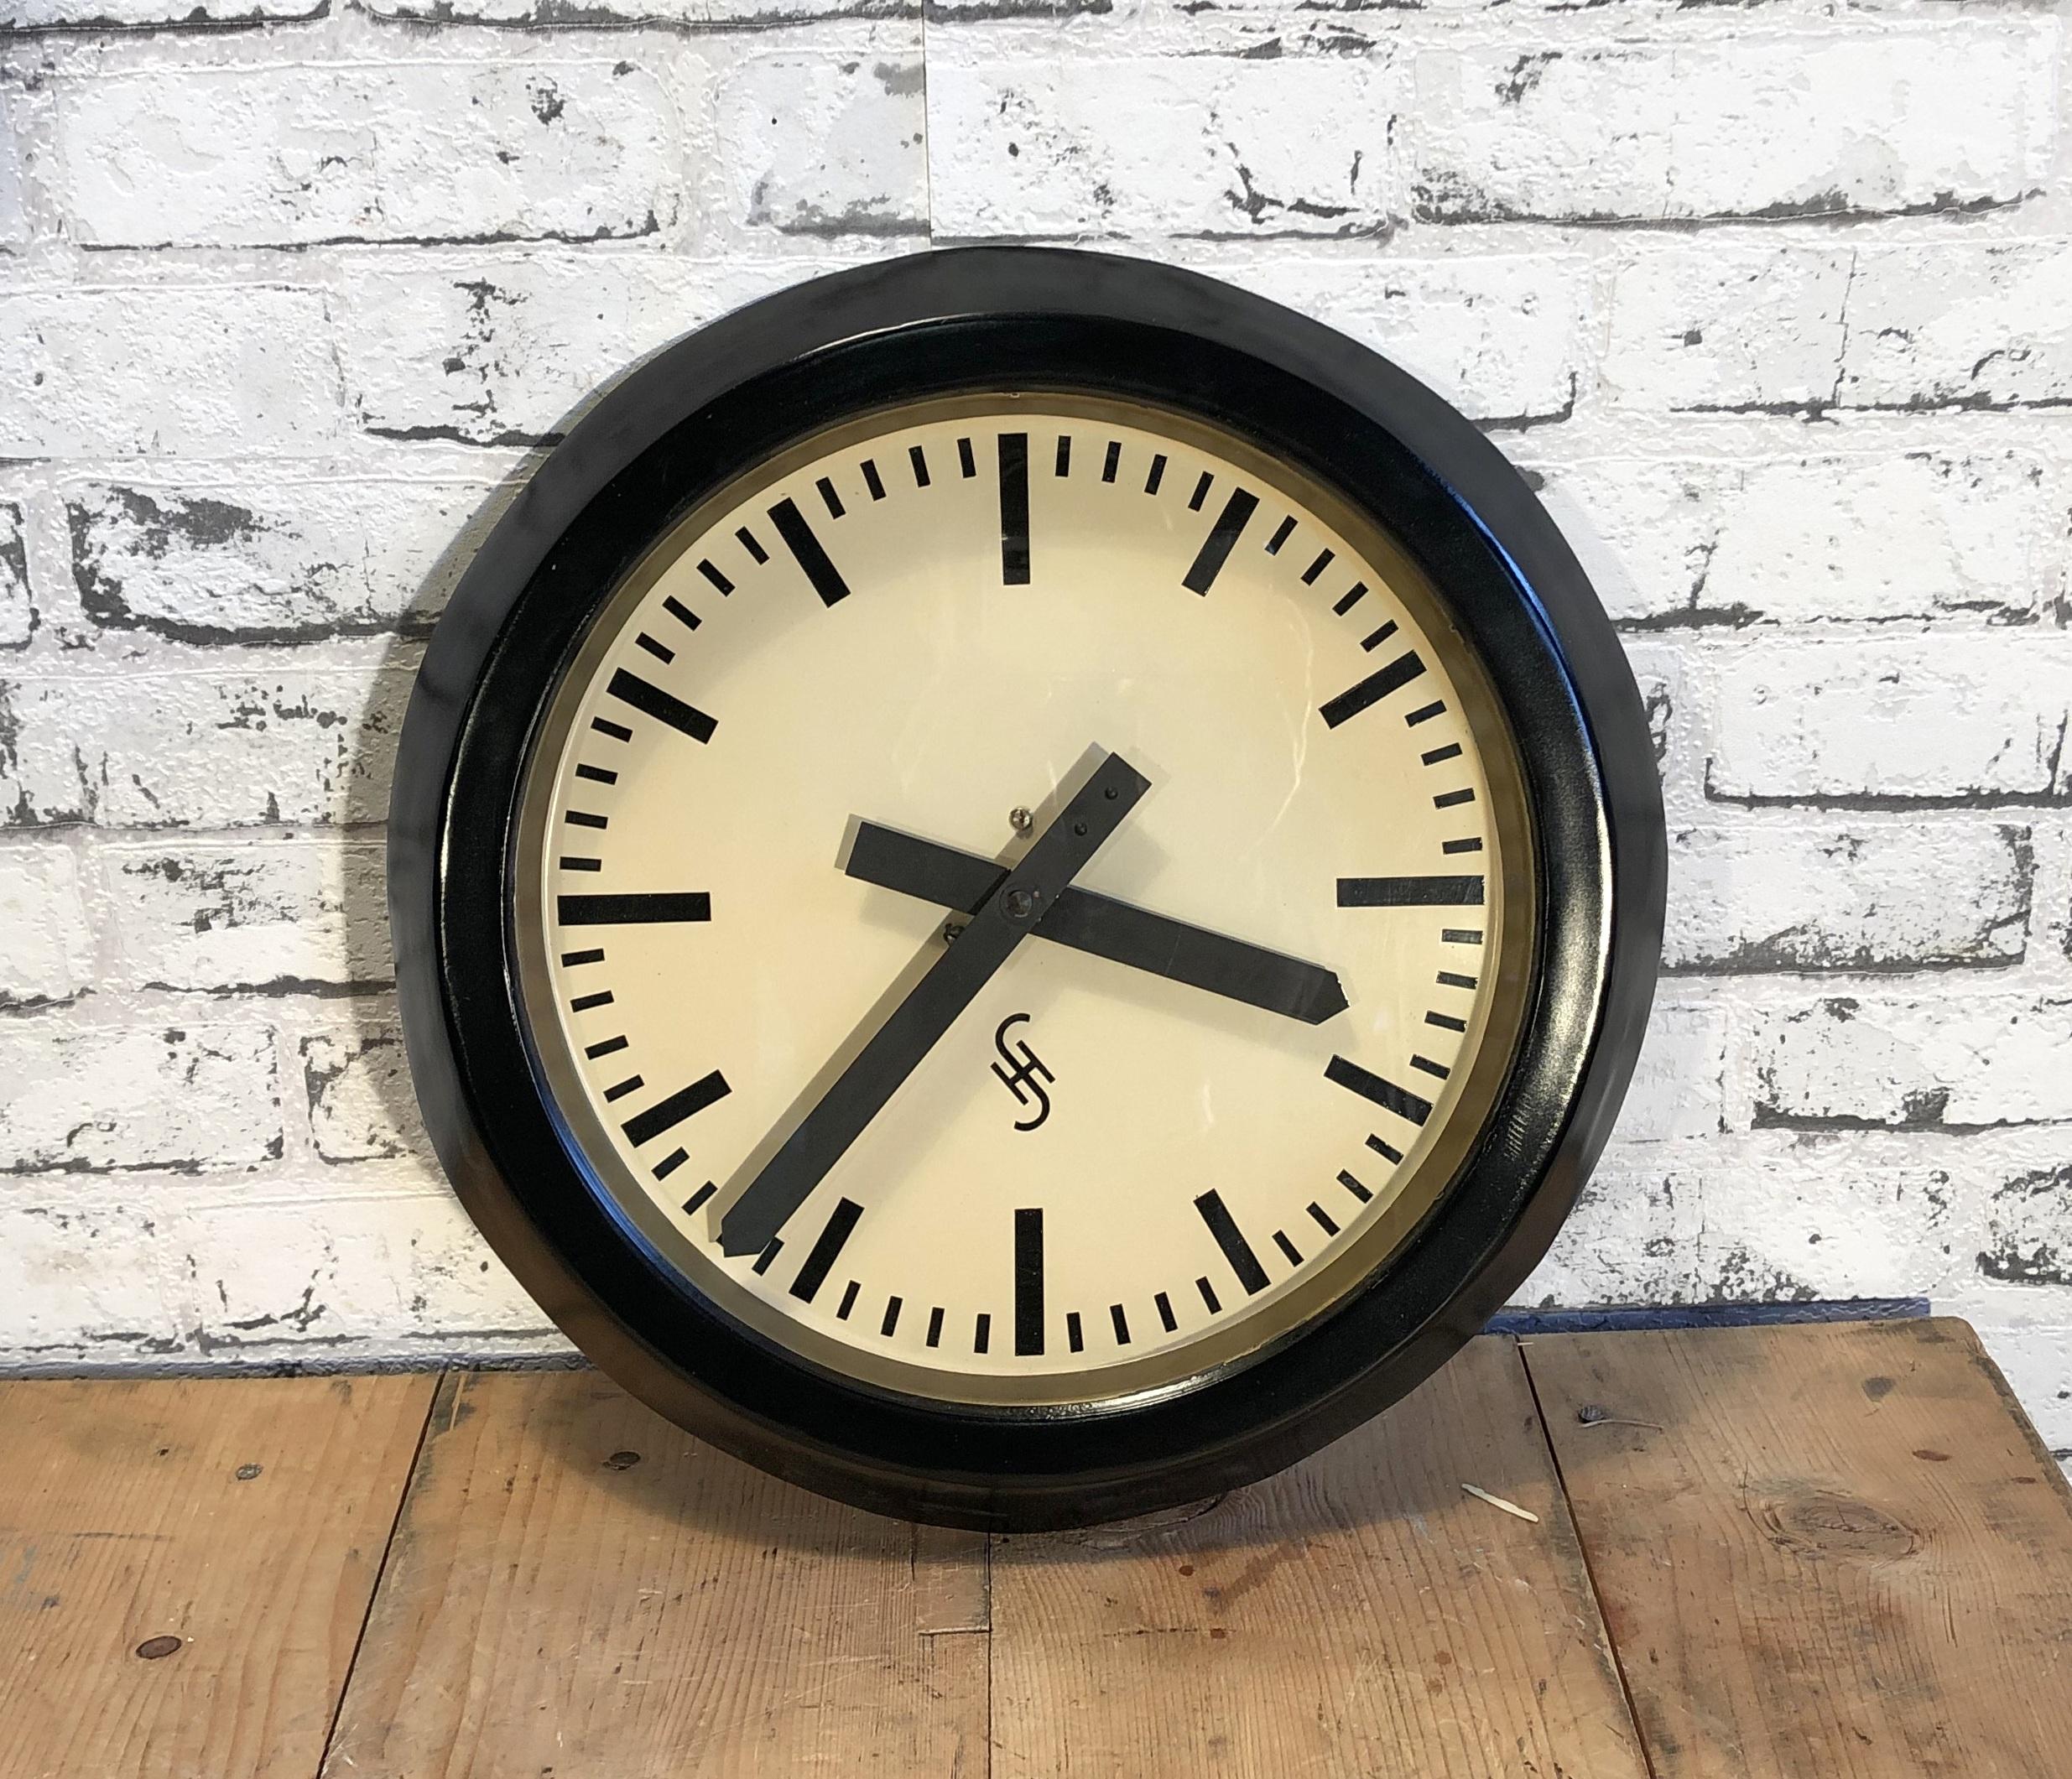 This wall clock was produced by Siemens and Halske in Germany during the 1950s. It features a black metal frame, aluminum dial, and a clear glass cover. The piece has been converted into a battery-powered clockwork and requires only one AA-battery.